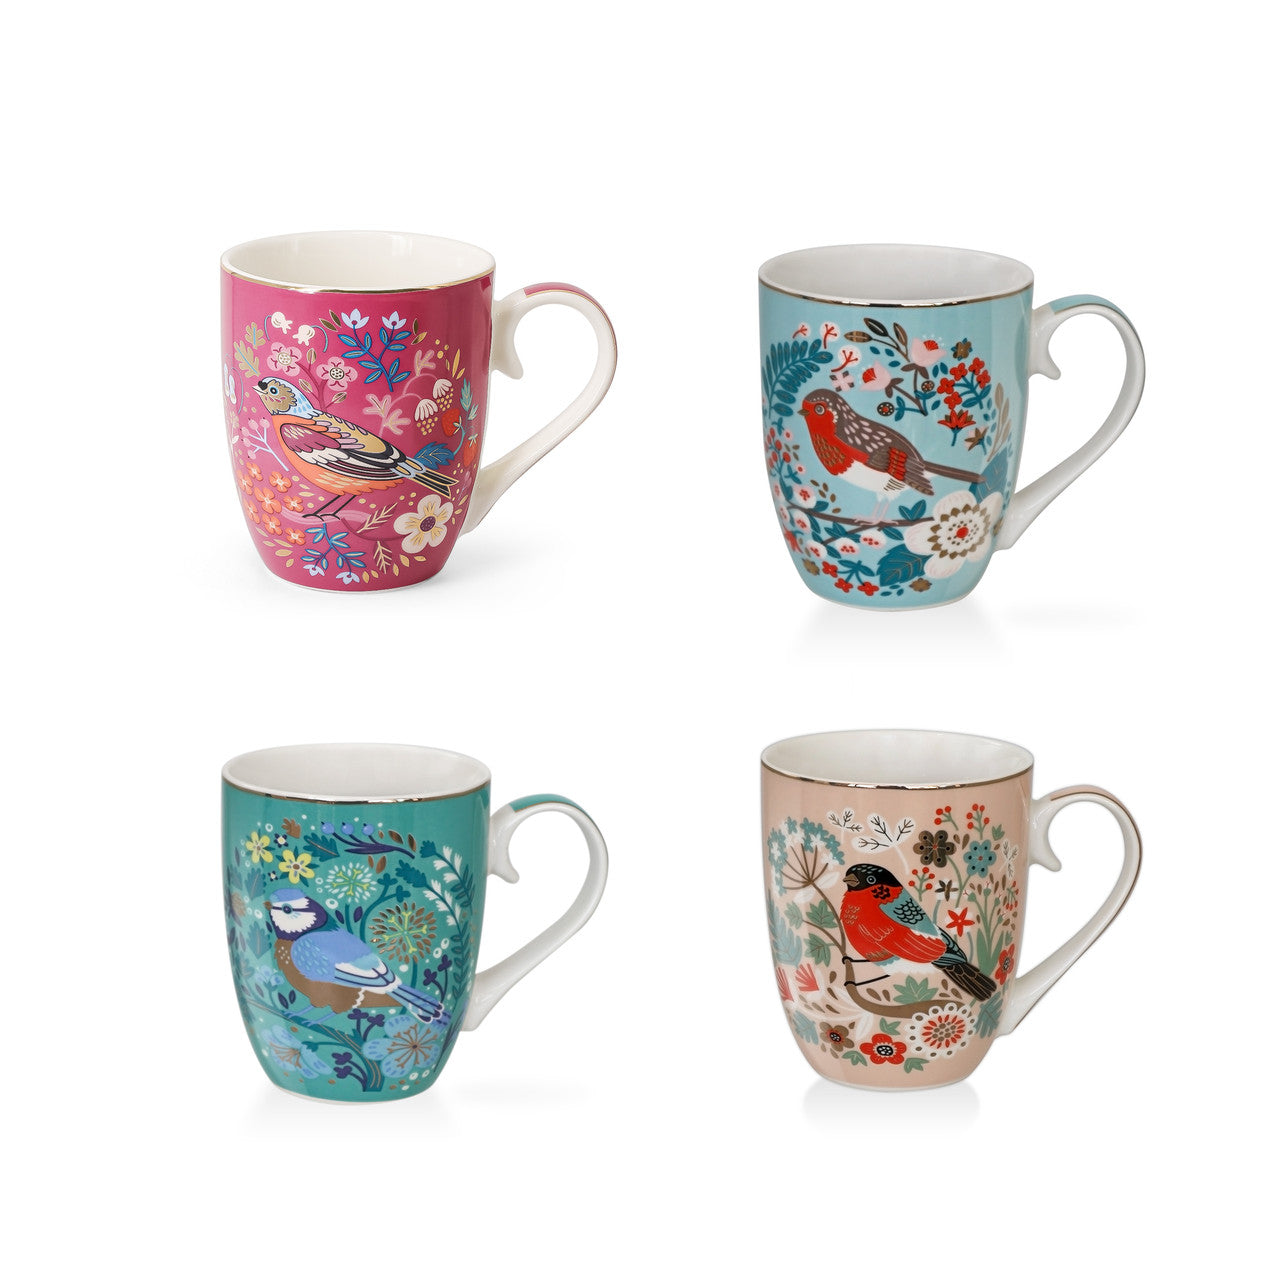 Tipperary Crystal Birdy Set of 4 - New 2022  New to our collection, this set of 4 mugs come beautifully illustrated and presented in a rigid Tipperary Crystal gift box. Makes a wonderful gift to be enjoyed over a peaceful cup of their favourite beverage.